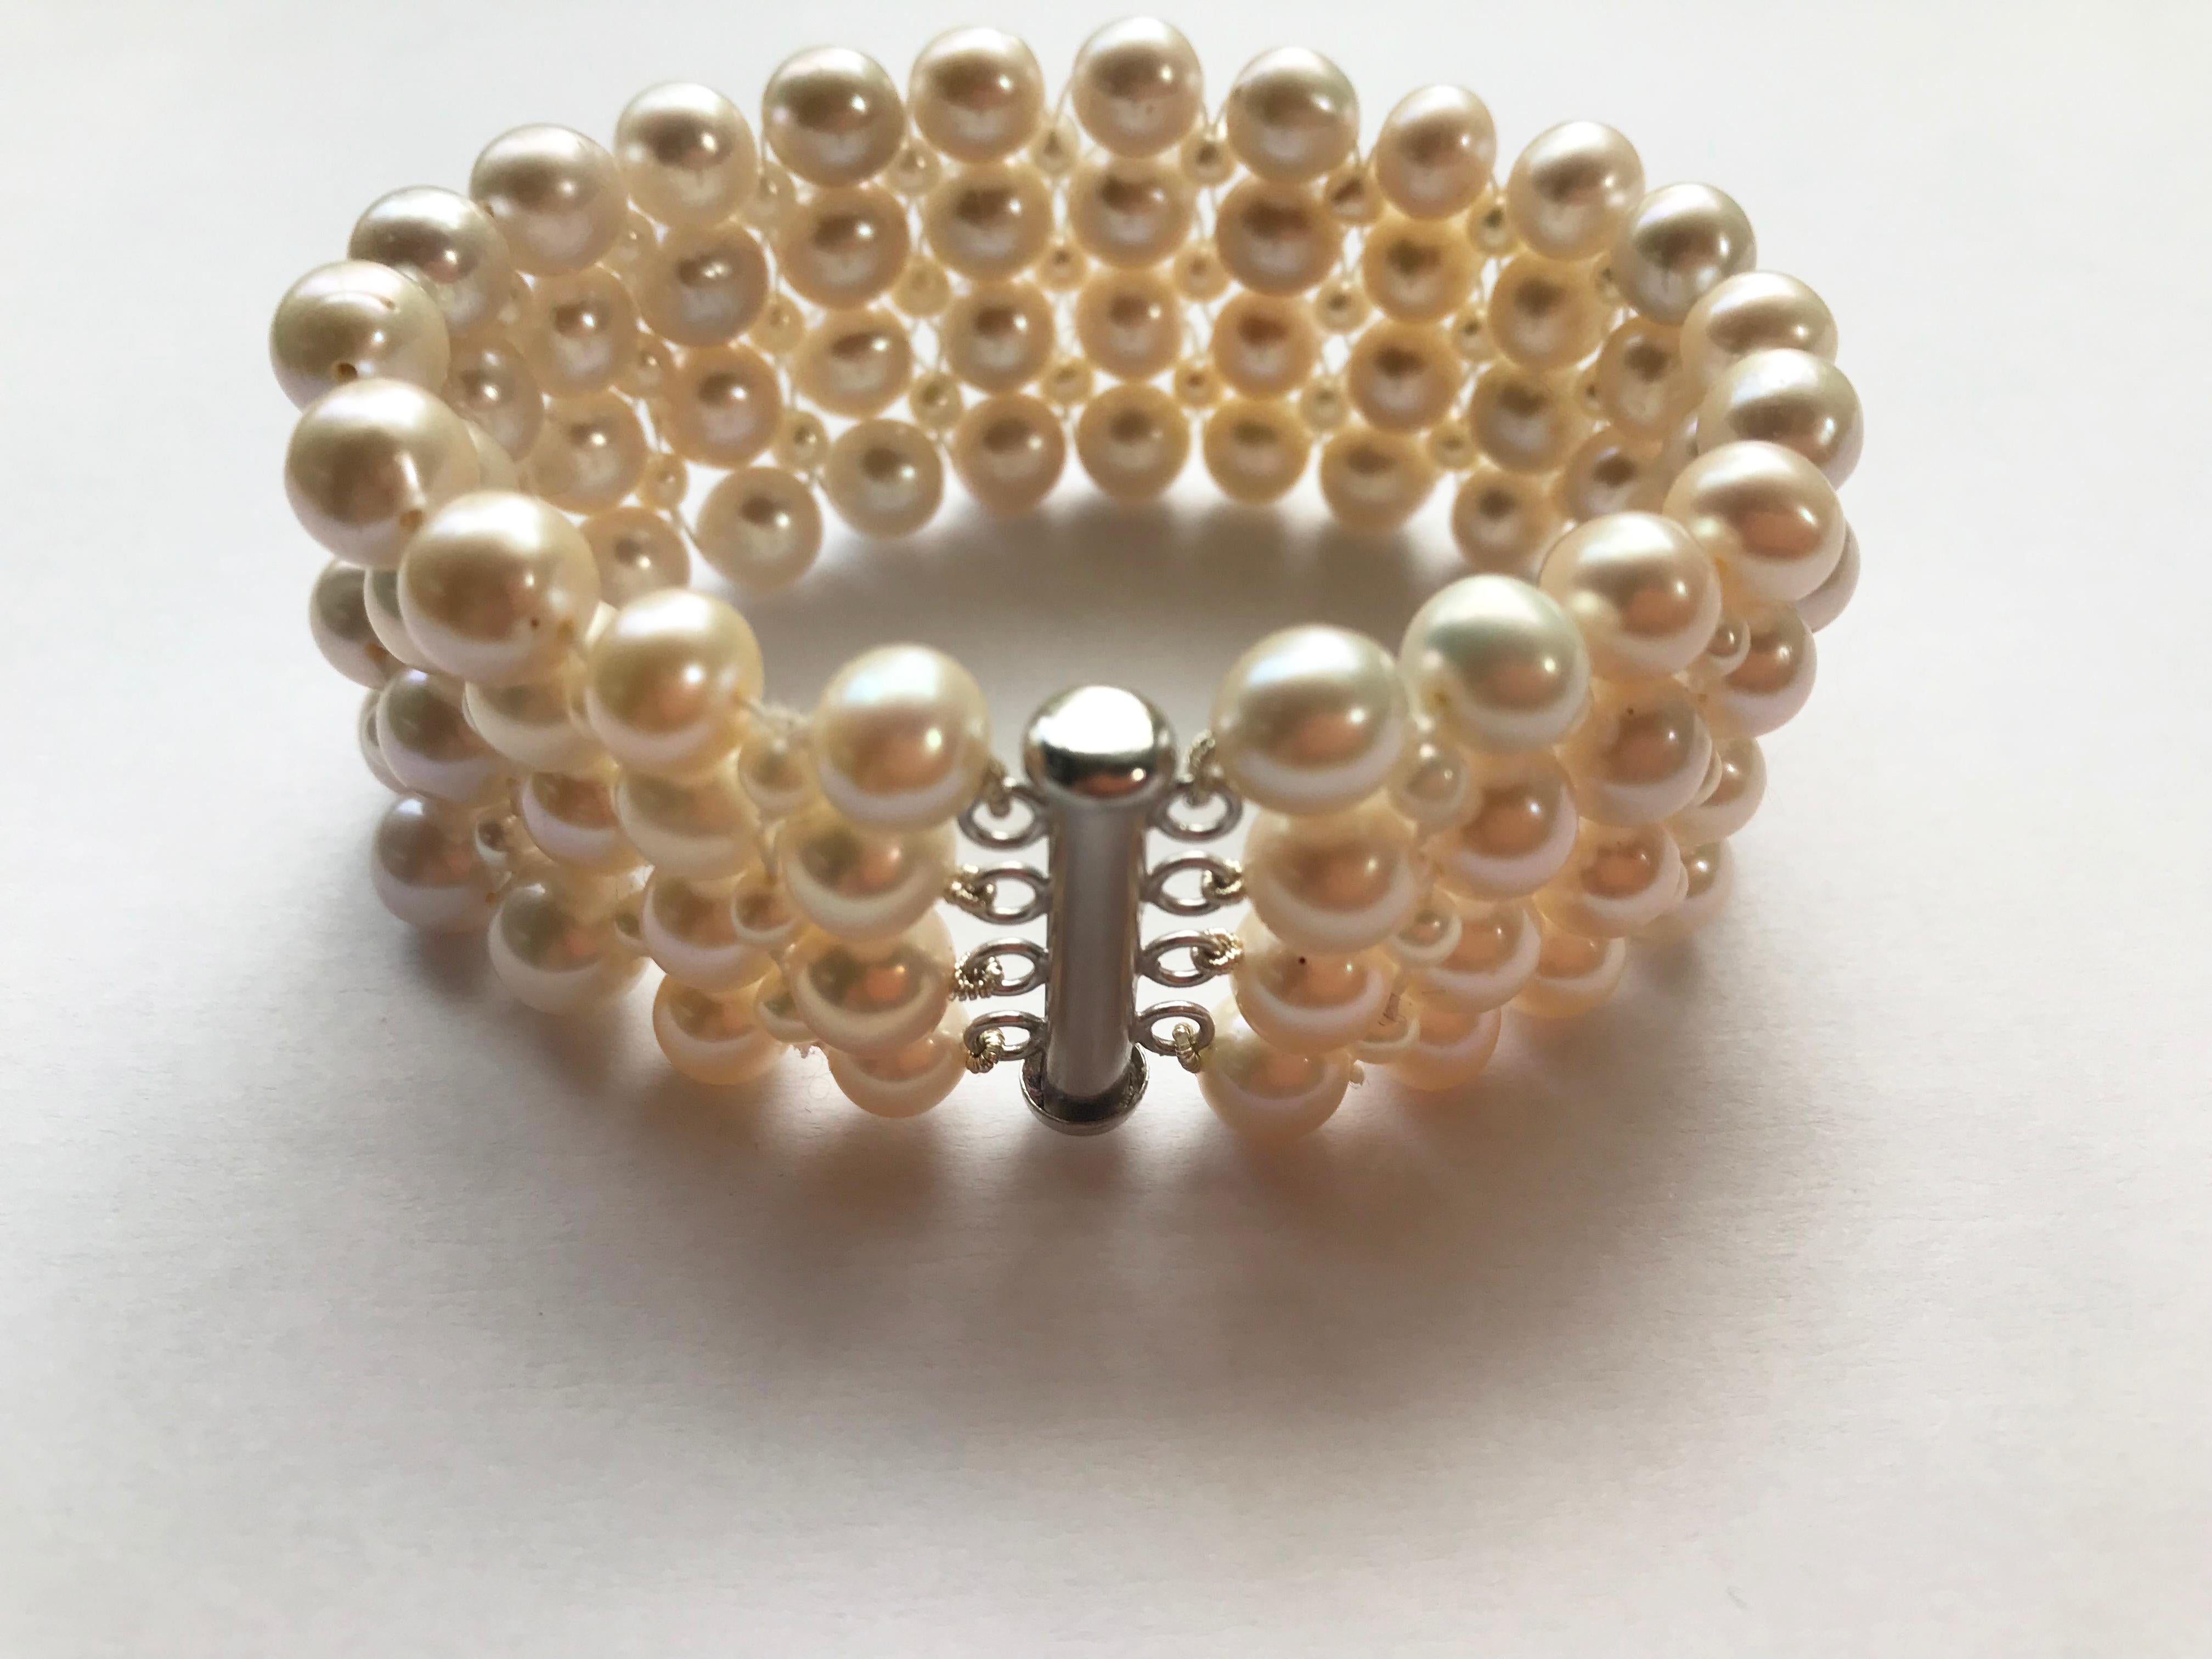 Marina J. Woven Pearl Bracelet with 14 Karat Yellow Gold-Plated Clasp For Sale 6